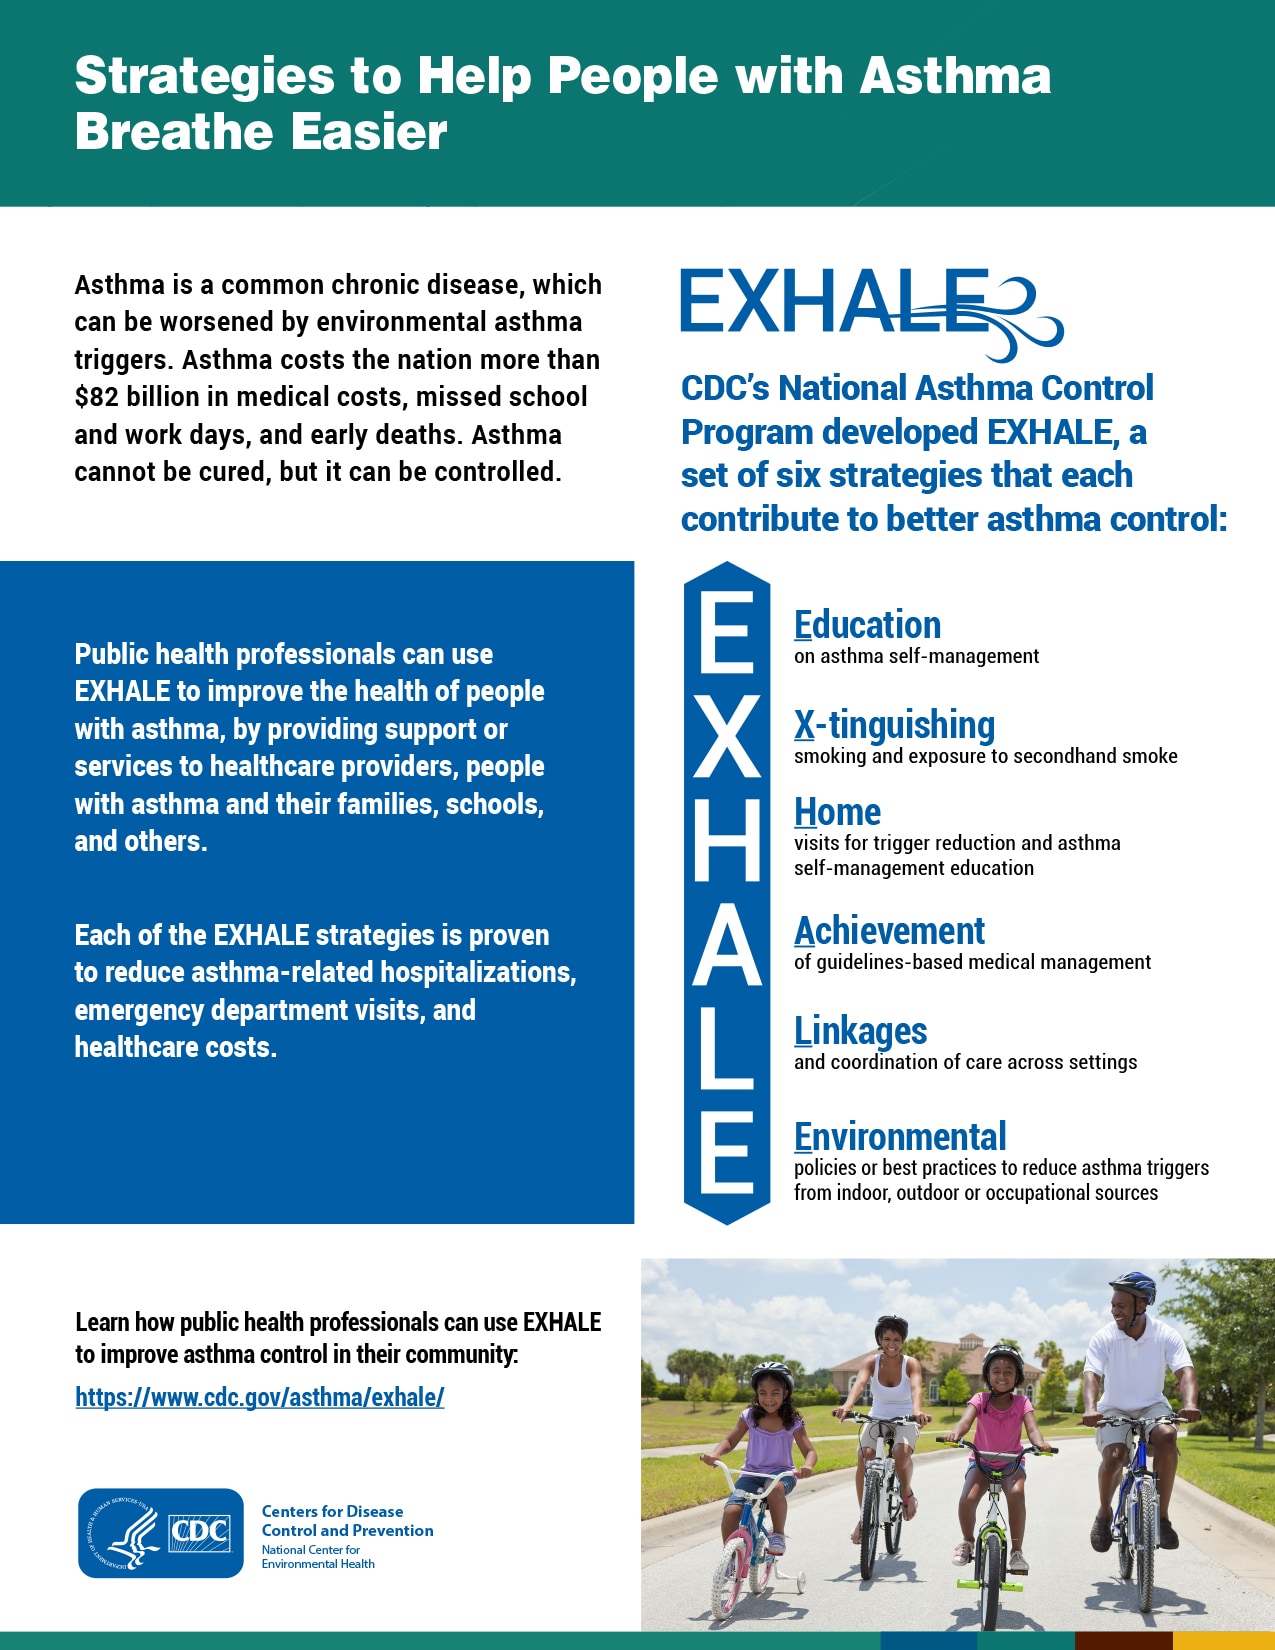 EXHALE Strategies to Help People with Asthma Breathe Easier